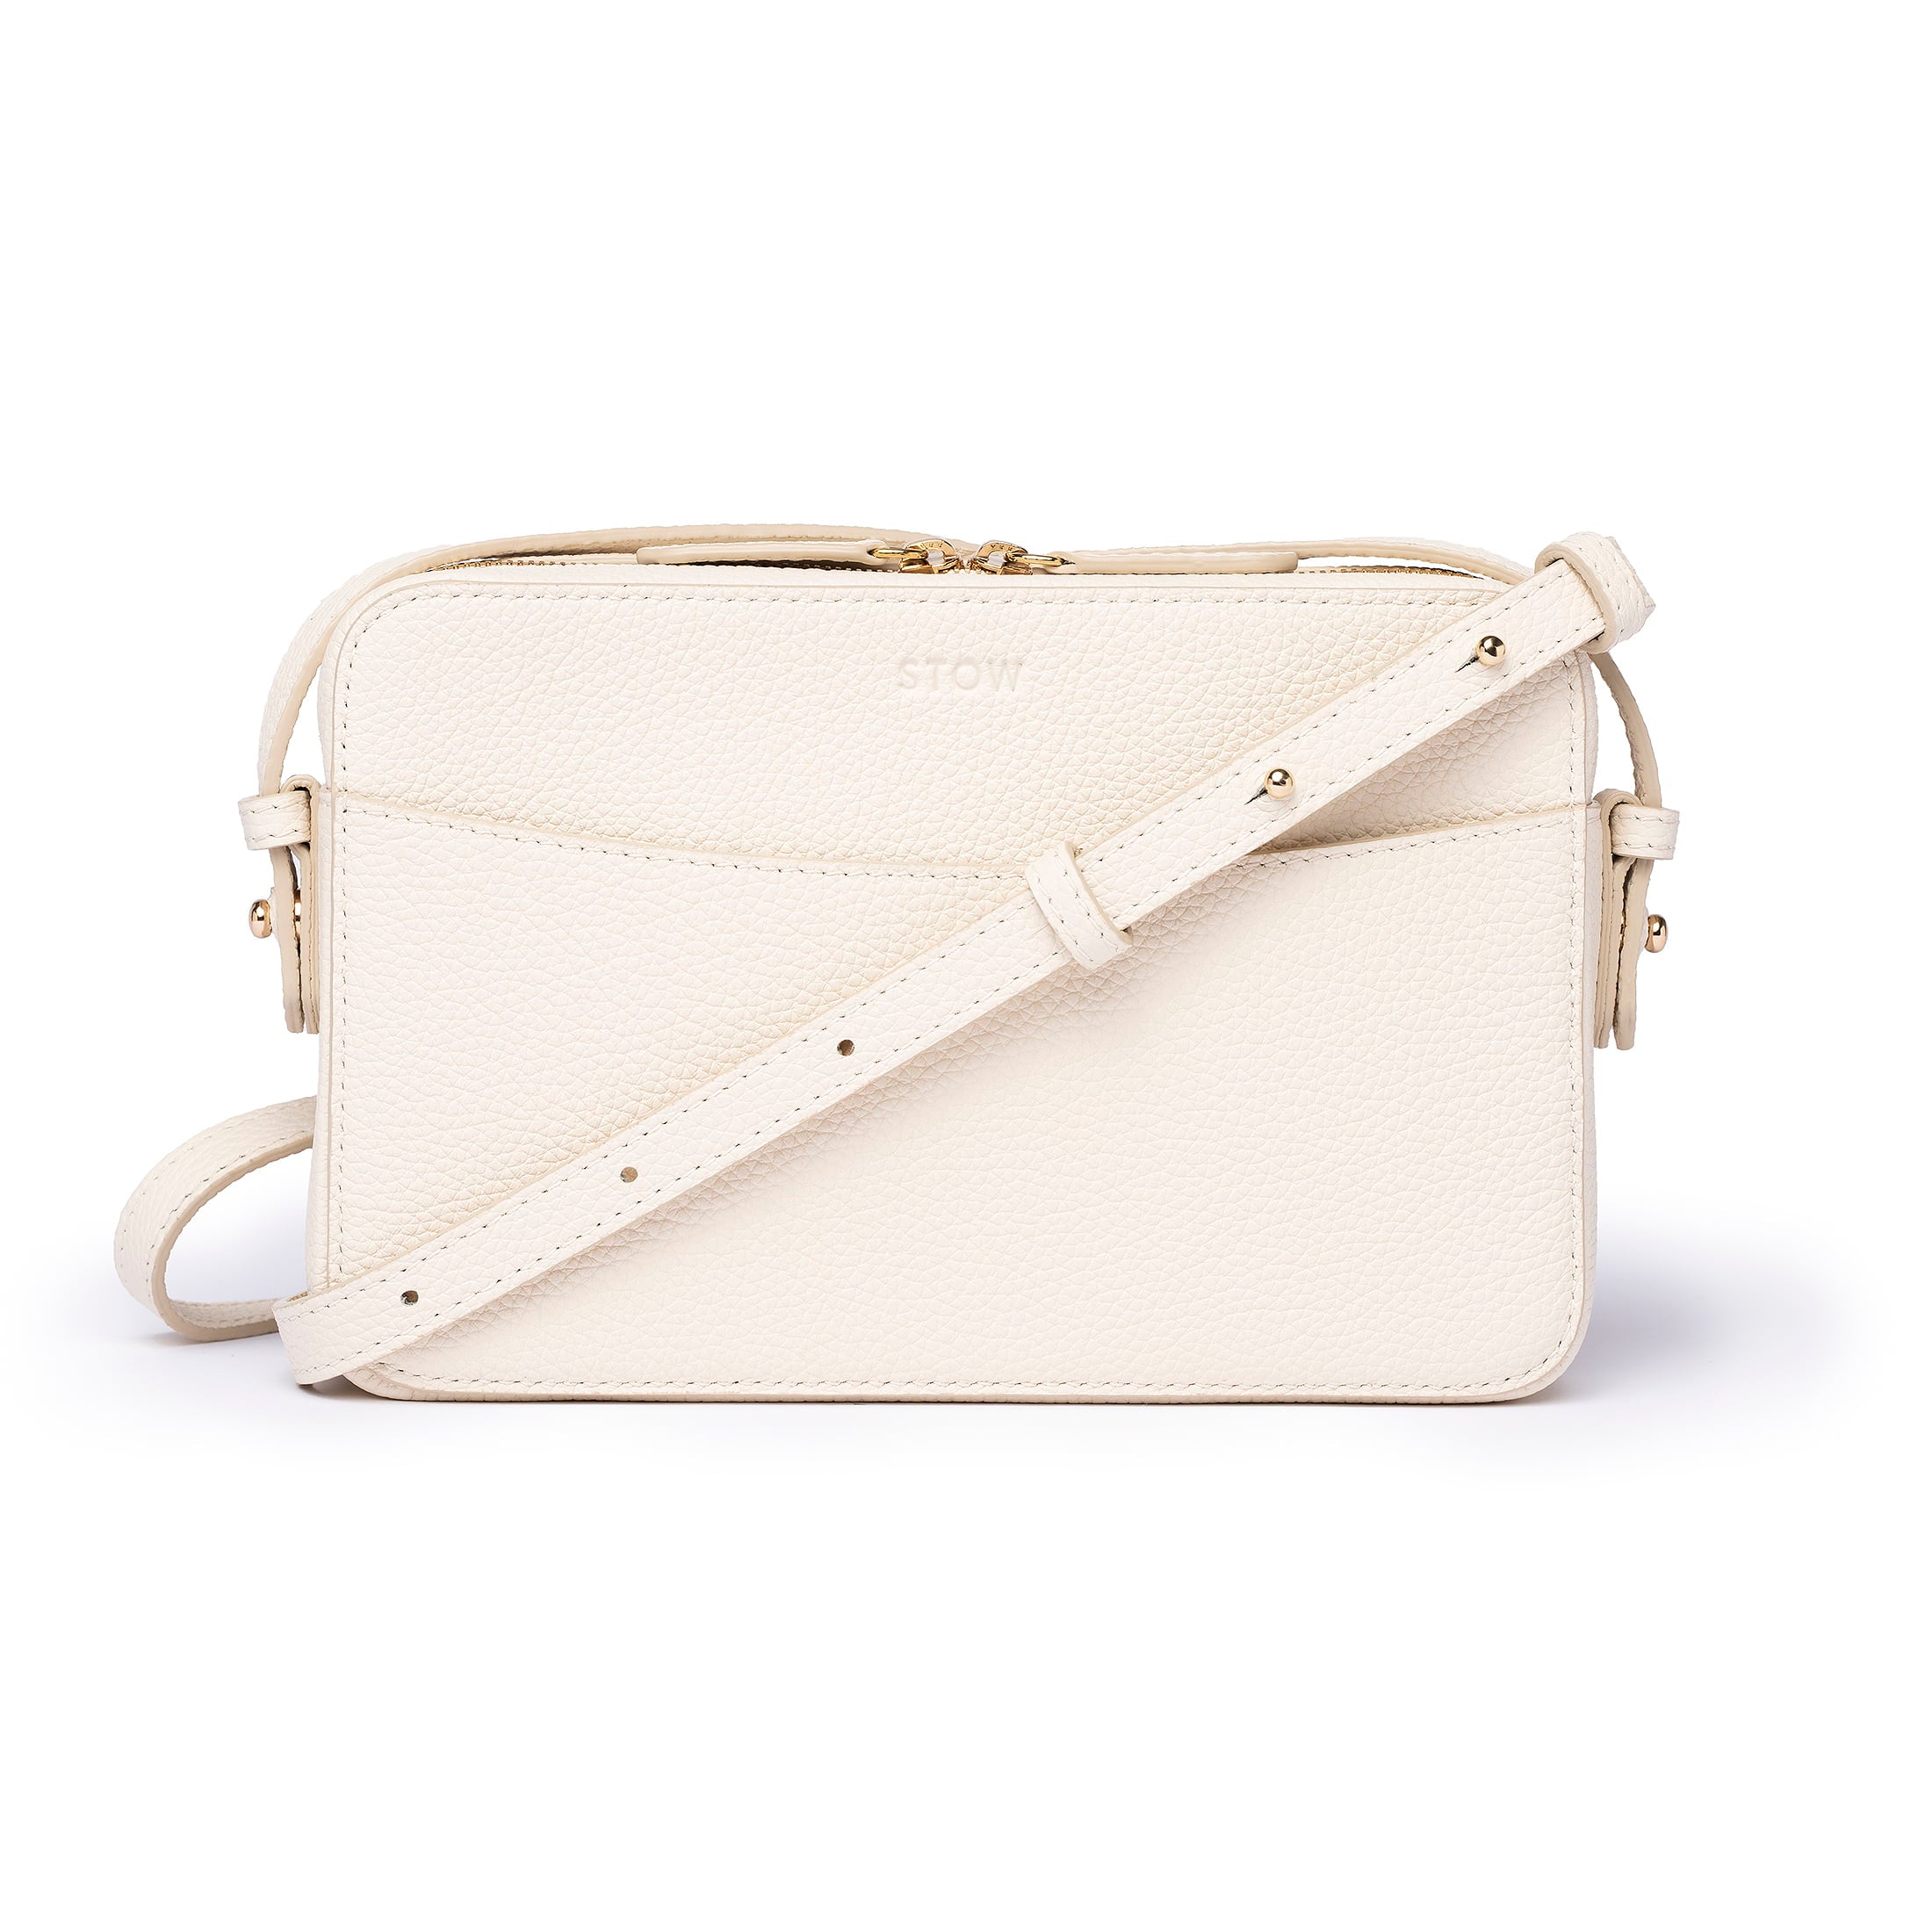 Spring Moon cream leather Camera Bag by STOW, studio image showing front of bag and crossbody strap.